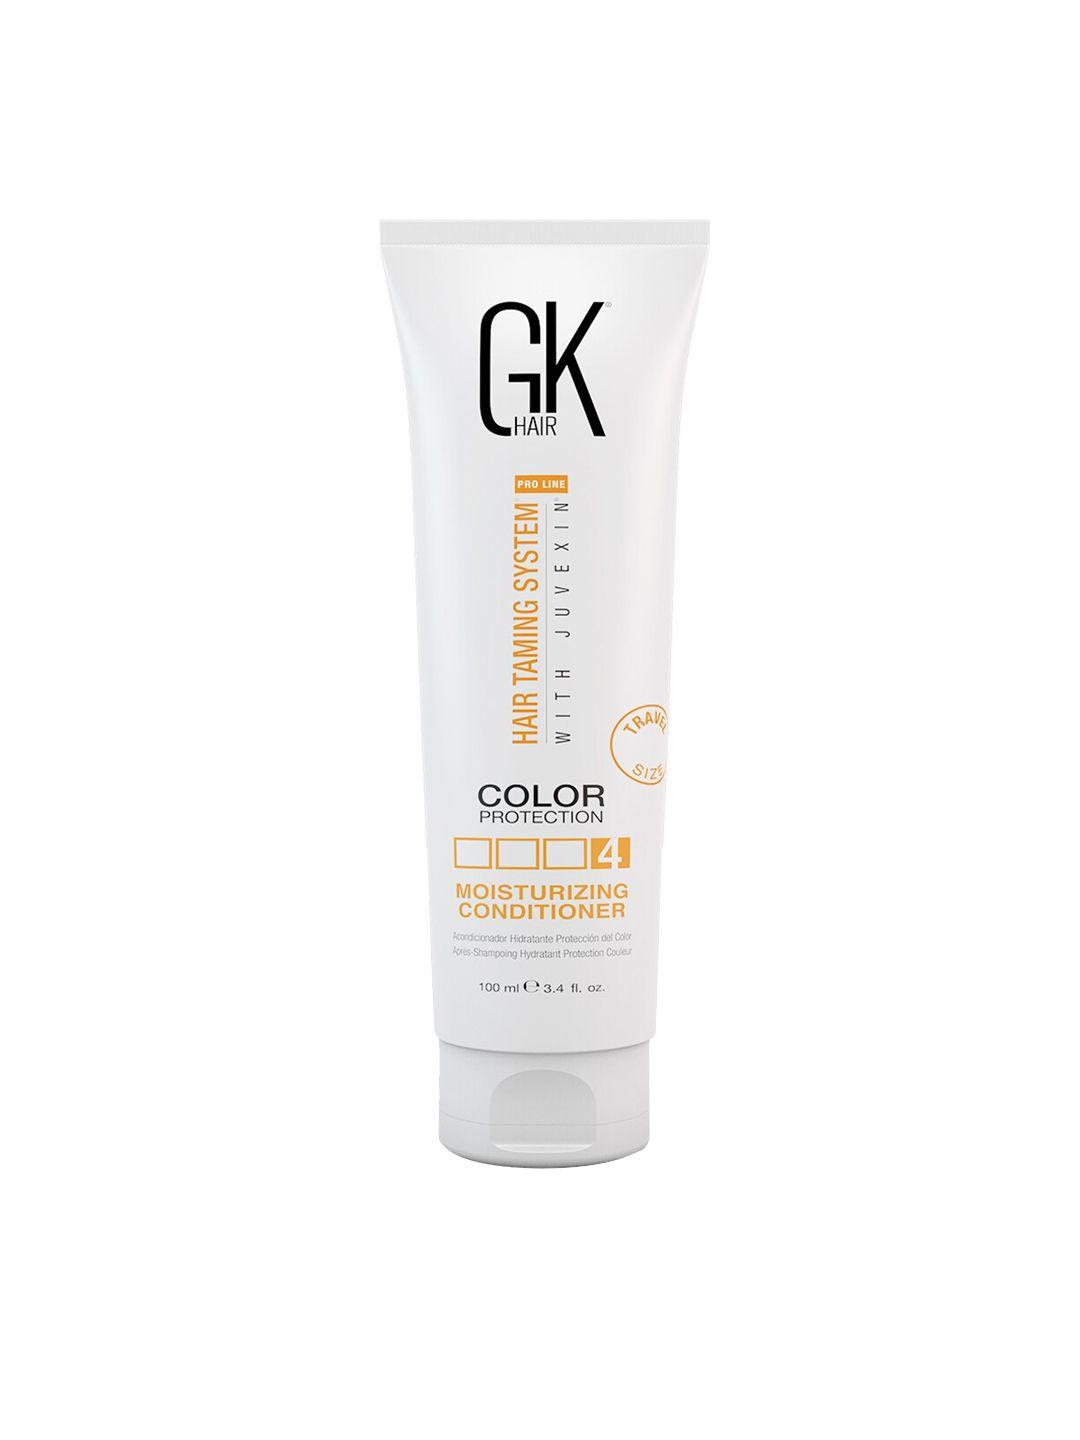 gk hair moisturizing conditioner for color protection - 100ml